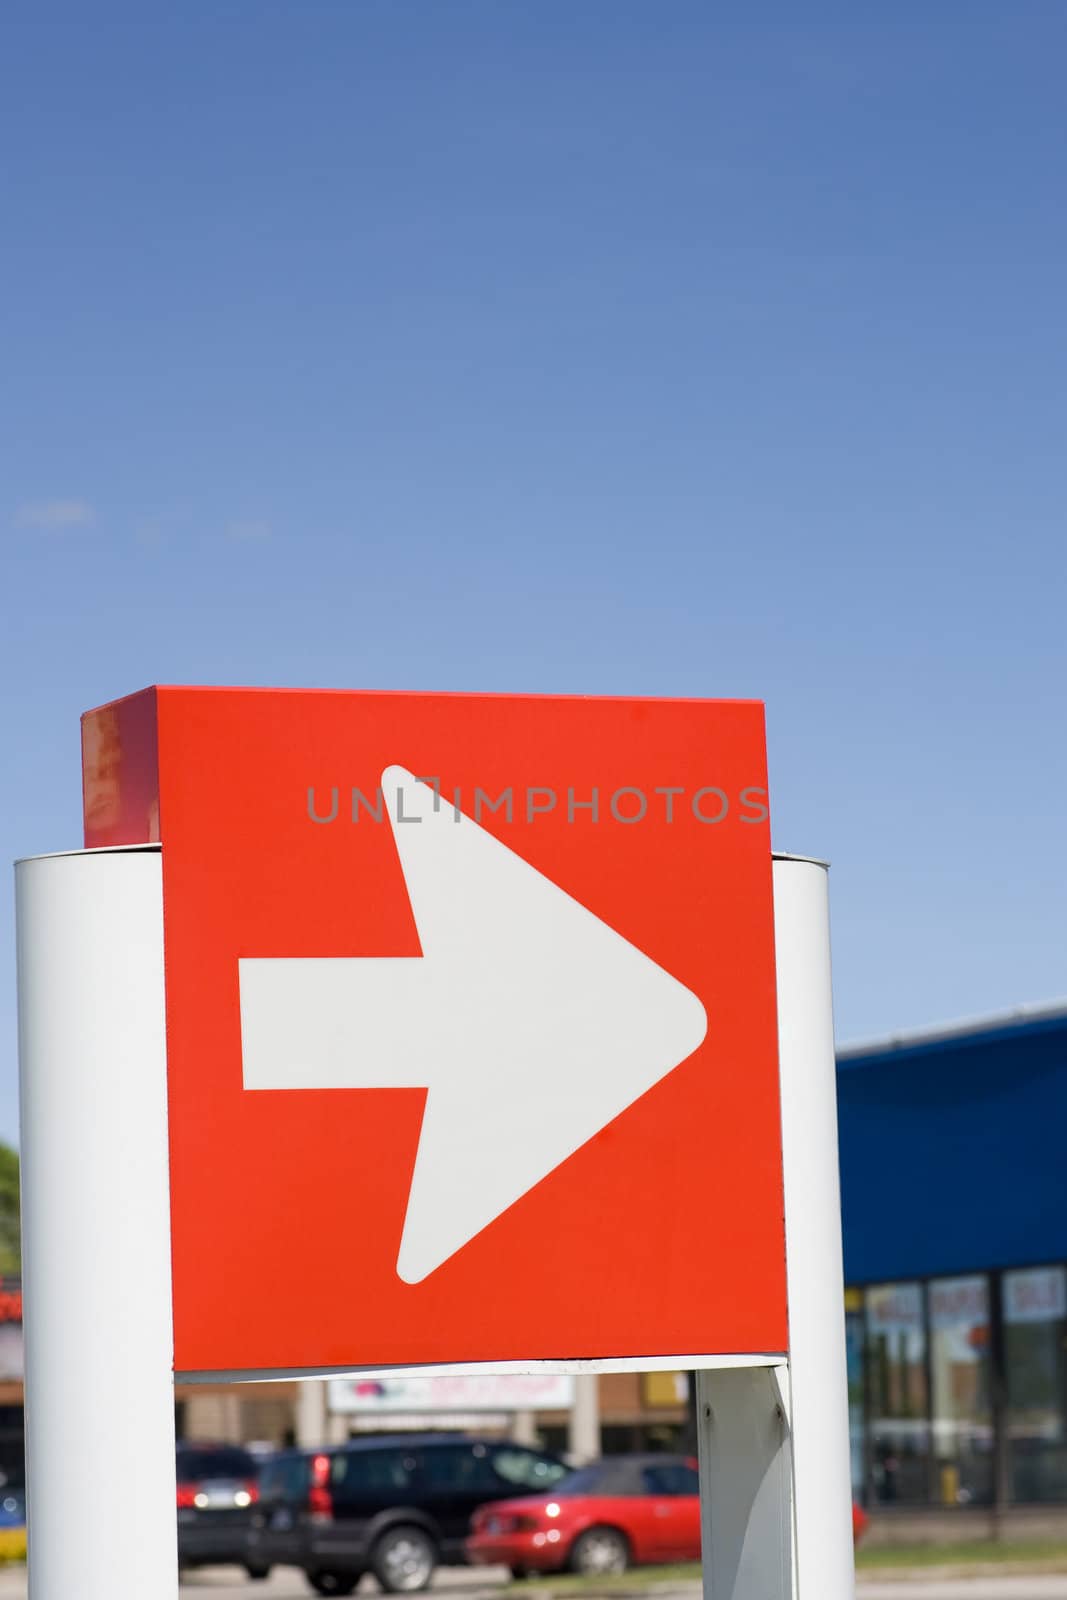 Directional sign in front of retail stores, with blue sky background.